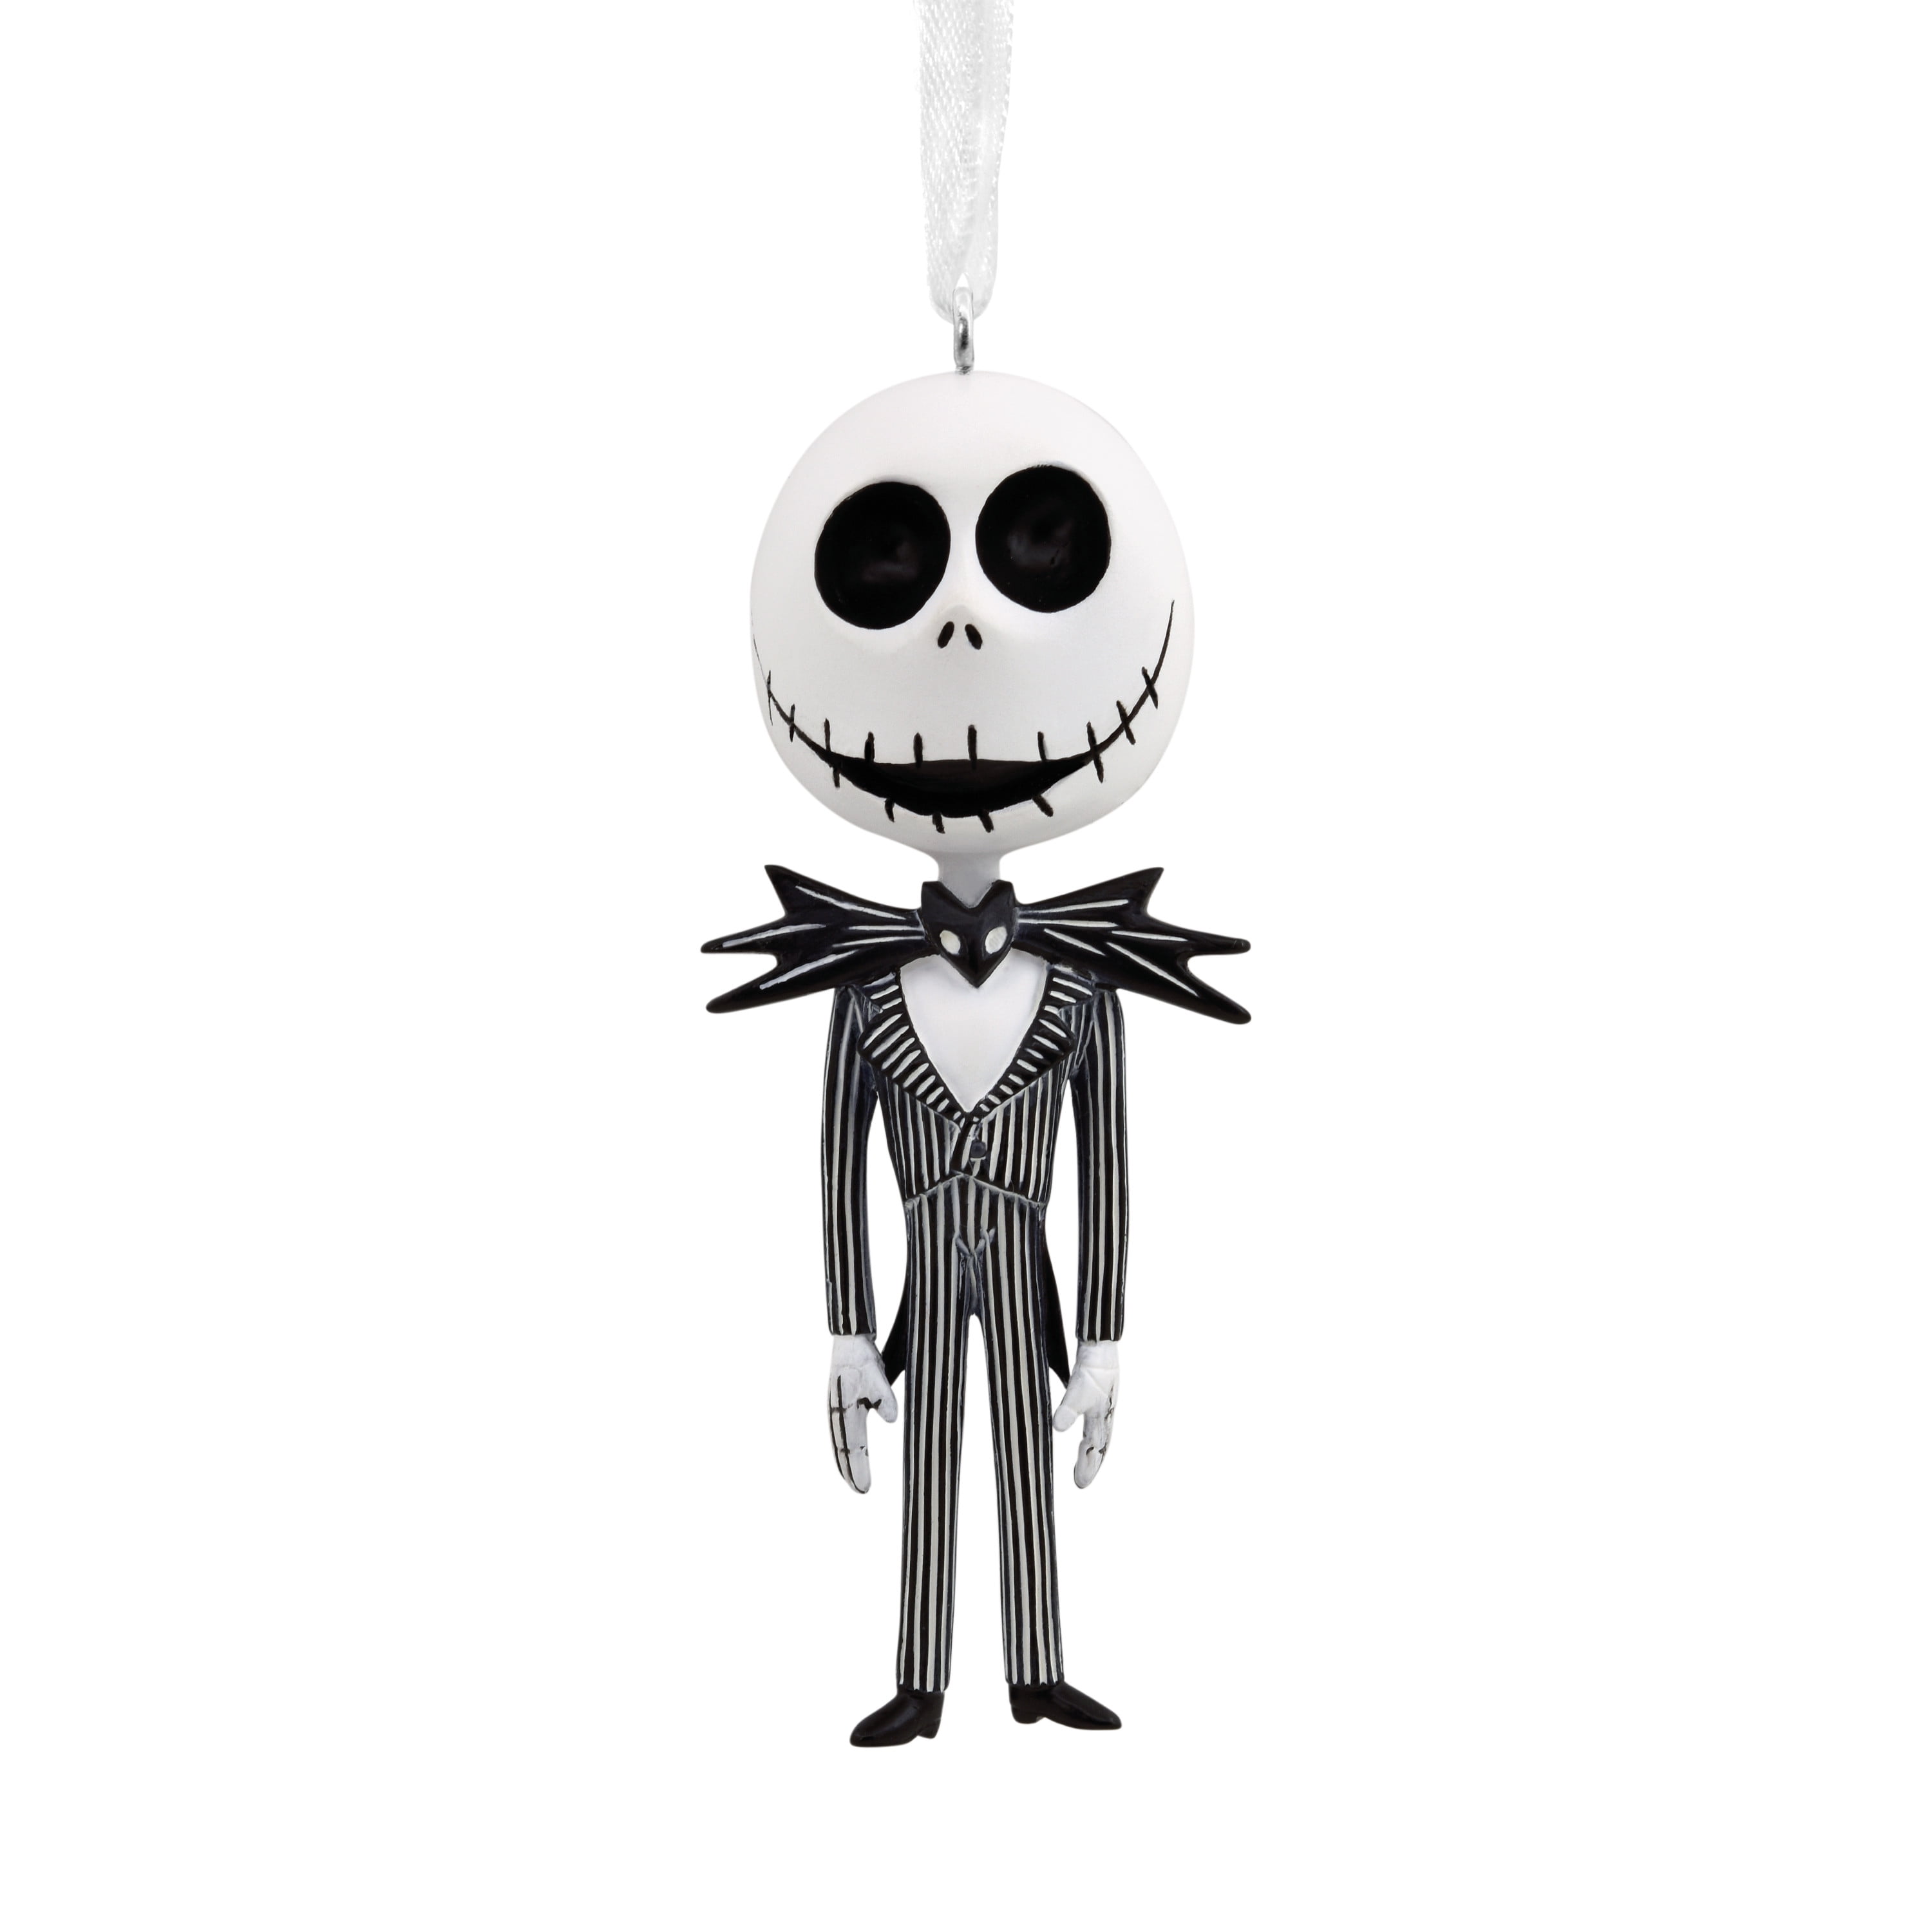 Details about    DISNEY STORE Tim Burton's Nightmare Before Christmas Glass Ornament SALLY 